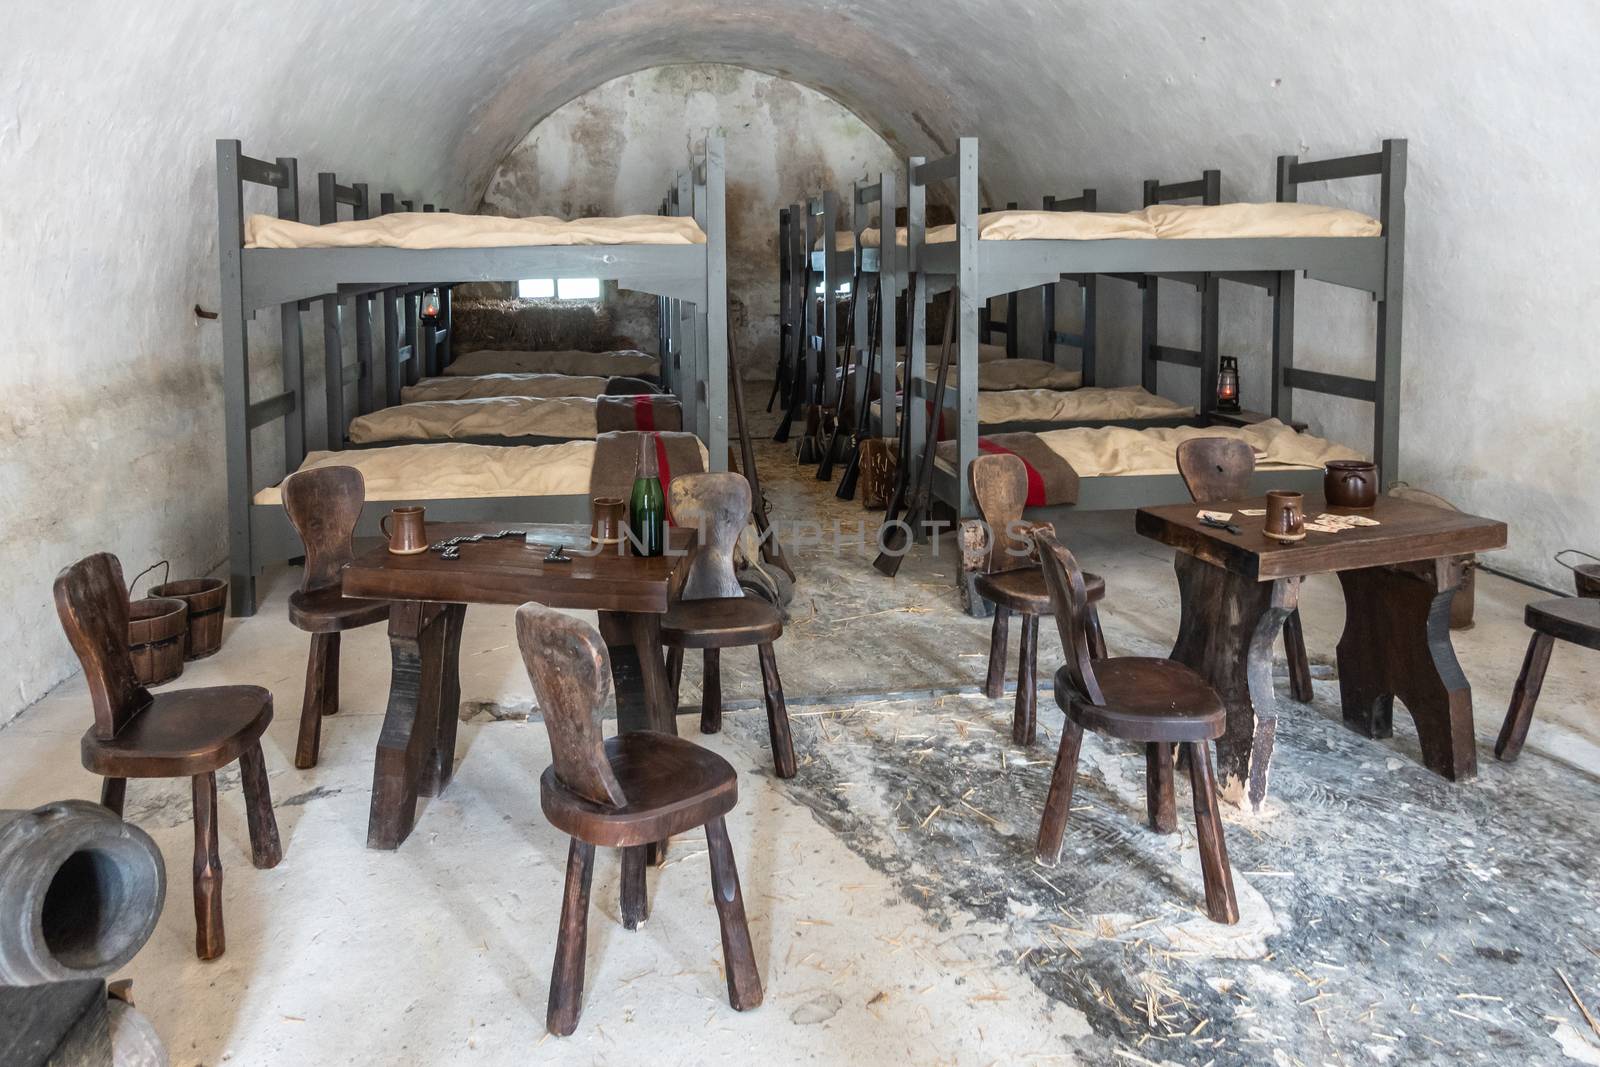 Dinant, Belgium - June 26, 2019: Inside Citadelle. Soldier barraks with bunk beds and a couple of tables and stools.